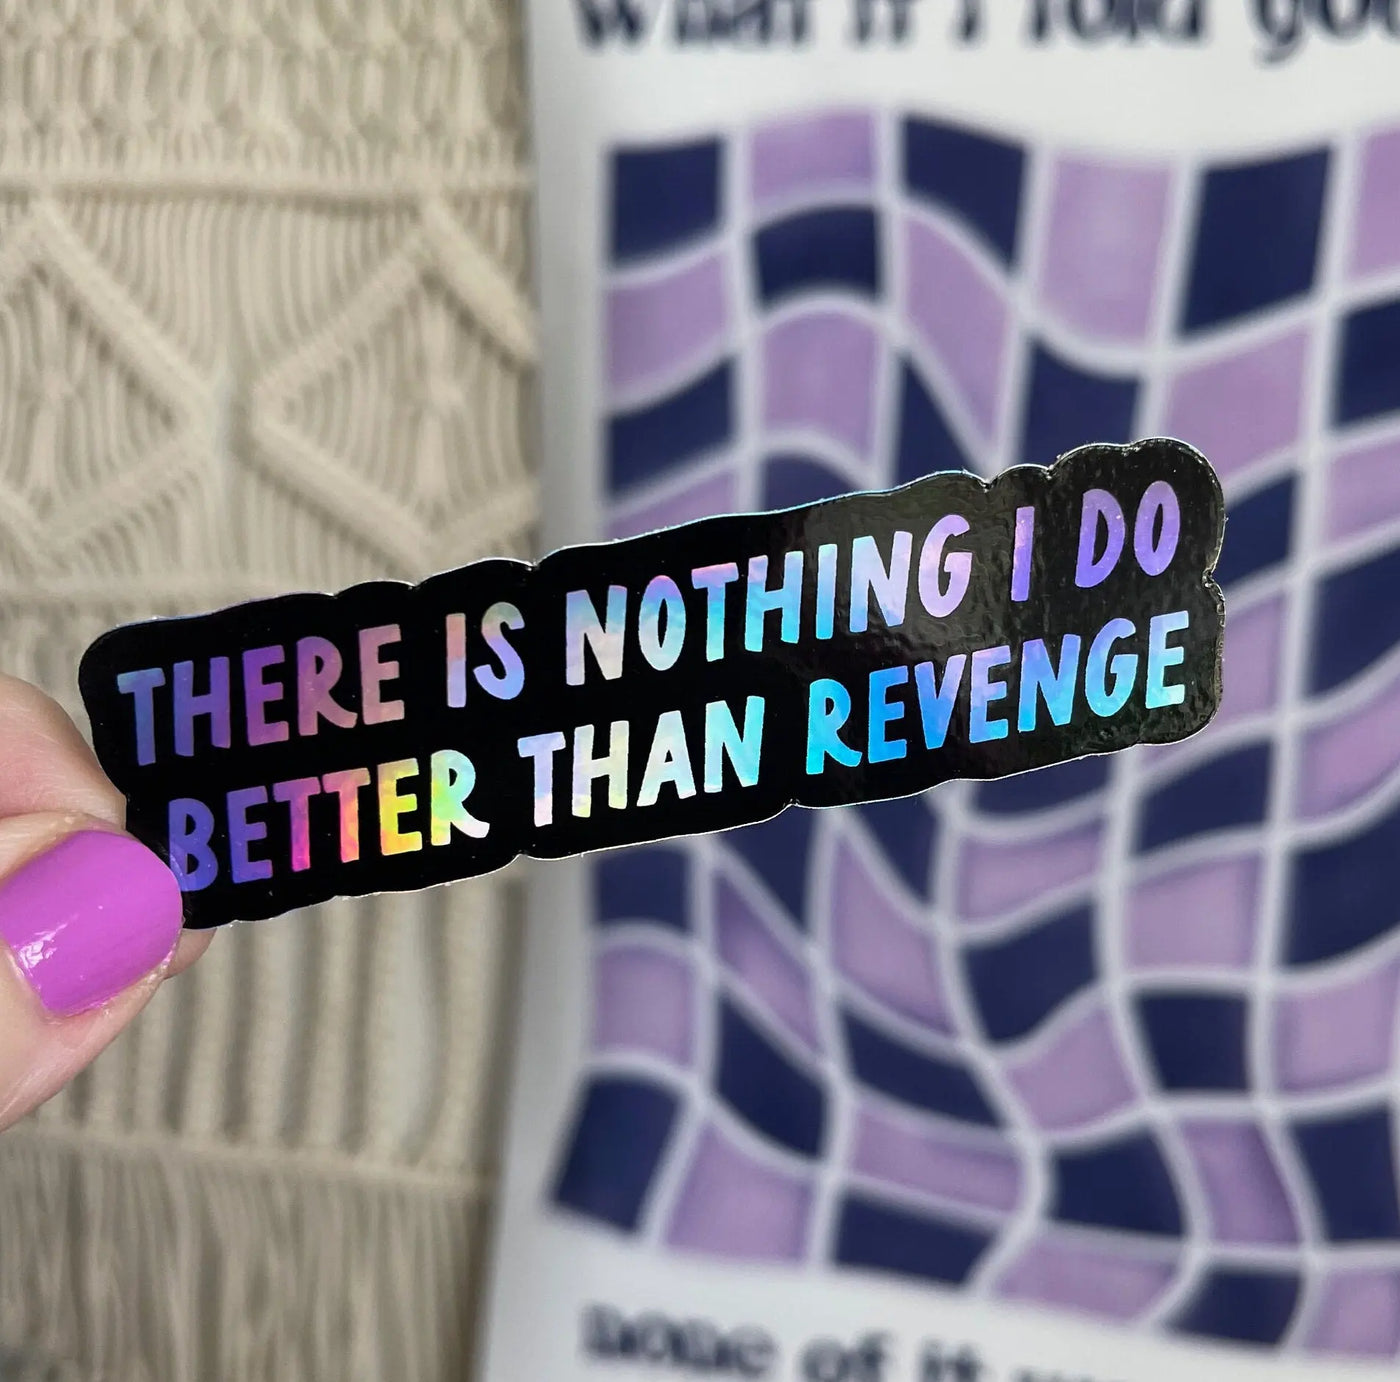 There Is Nothing I Do Better Than Revenge holographic sticker MangoIllustrated